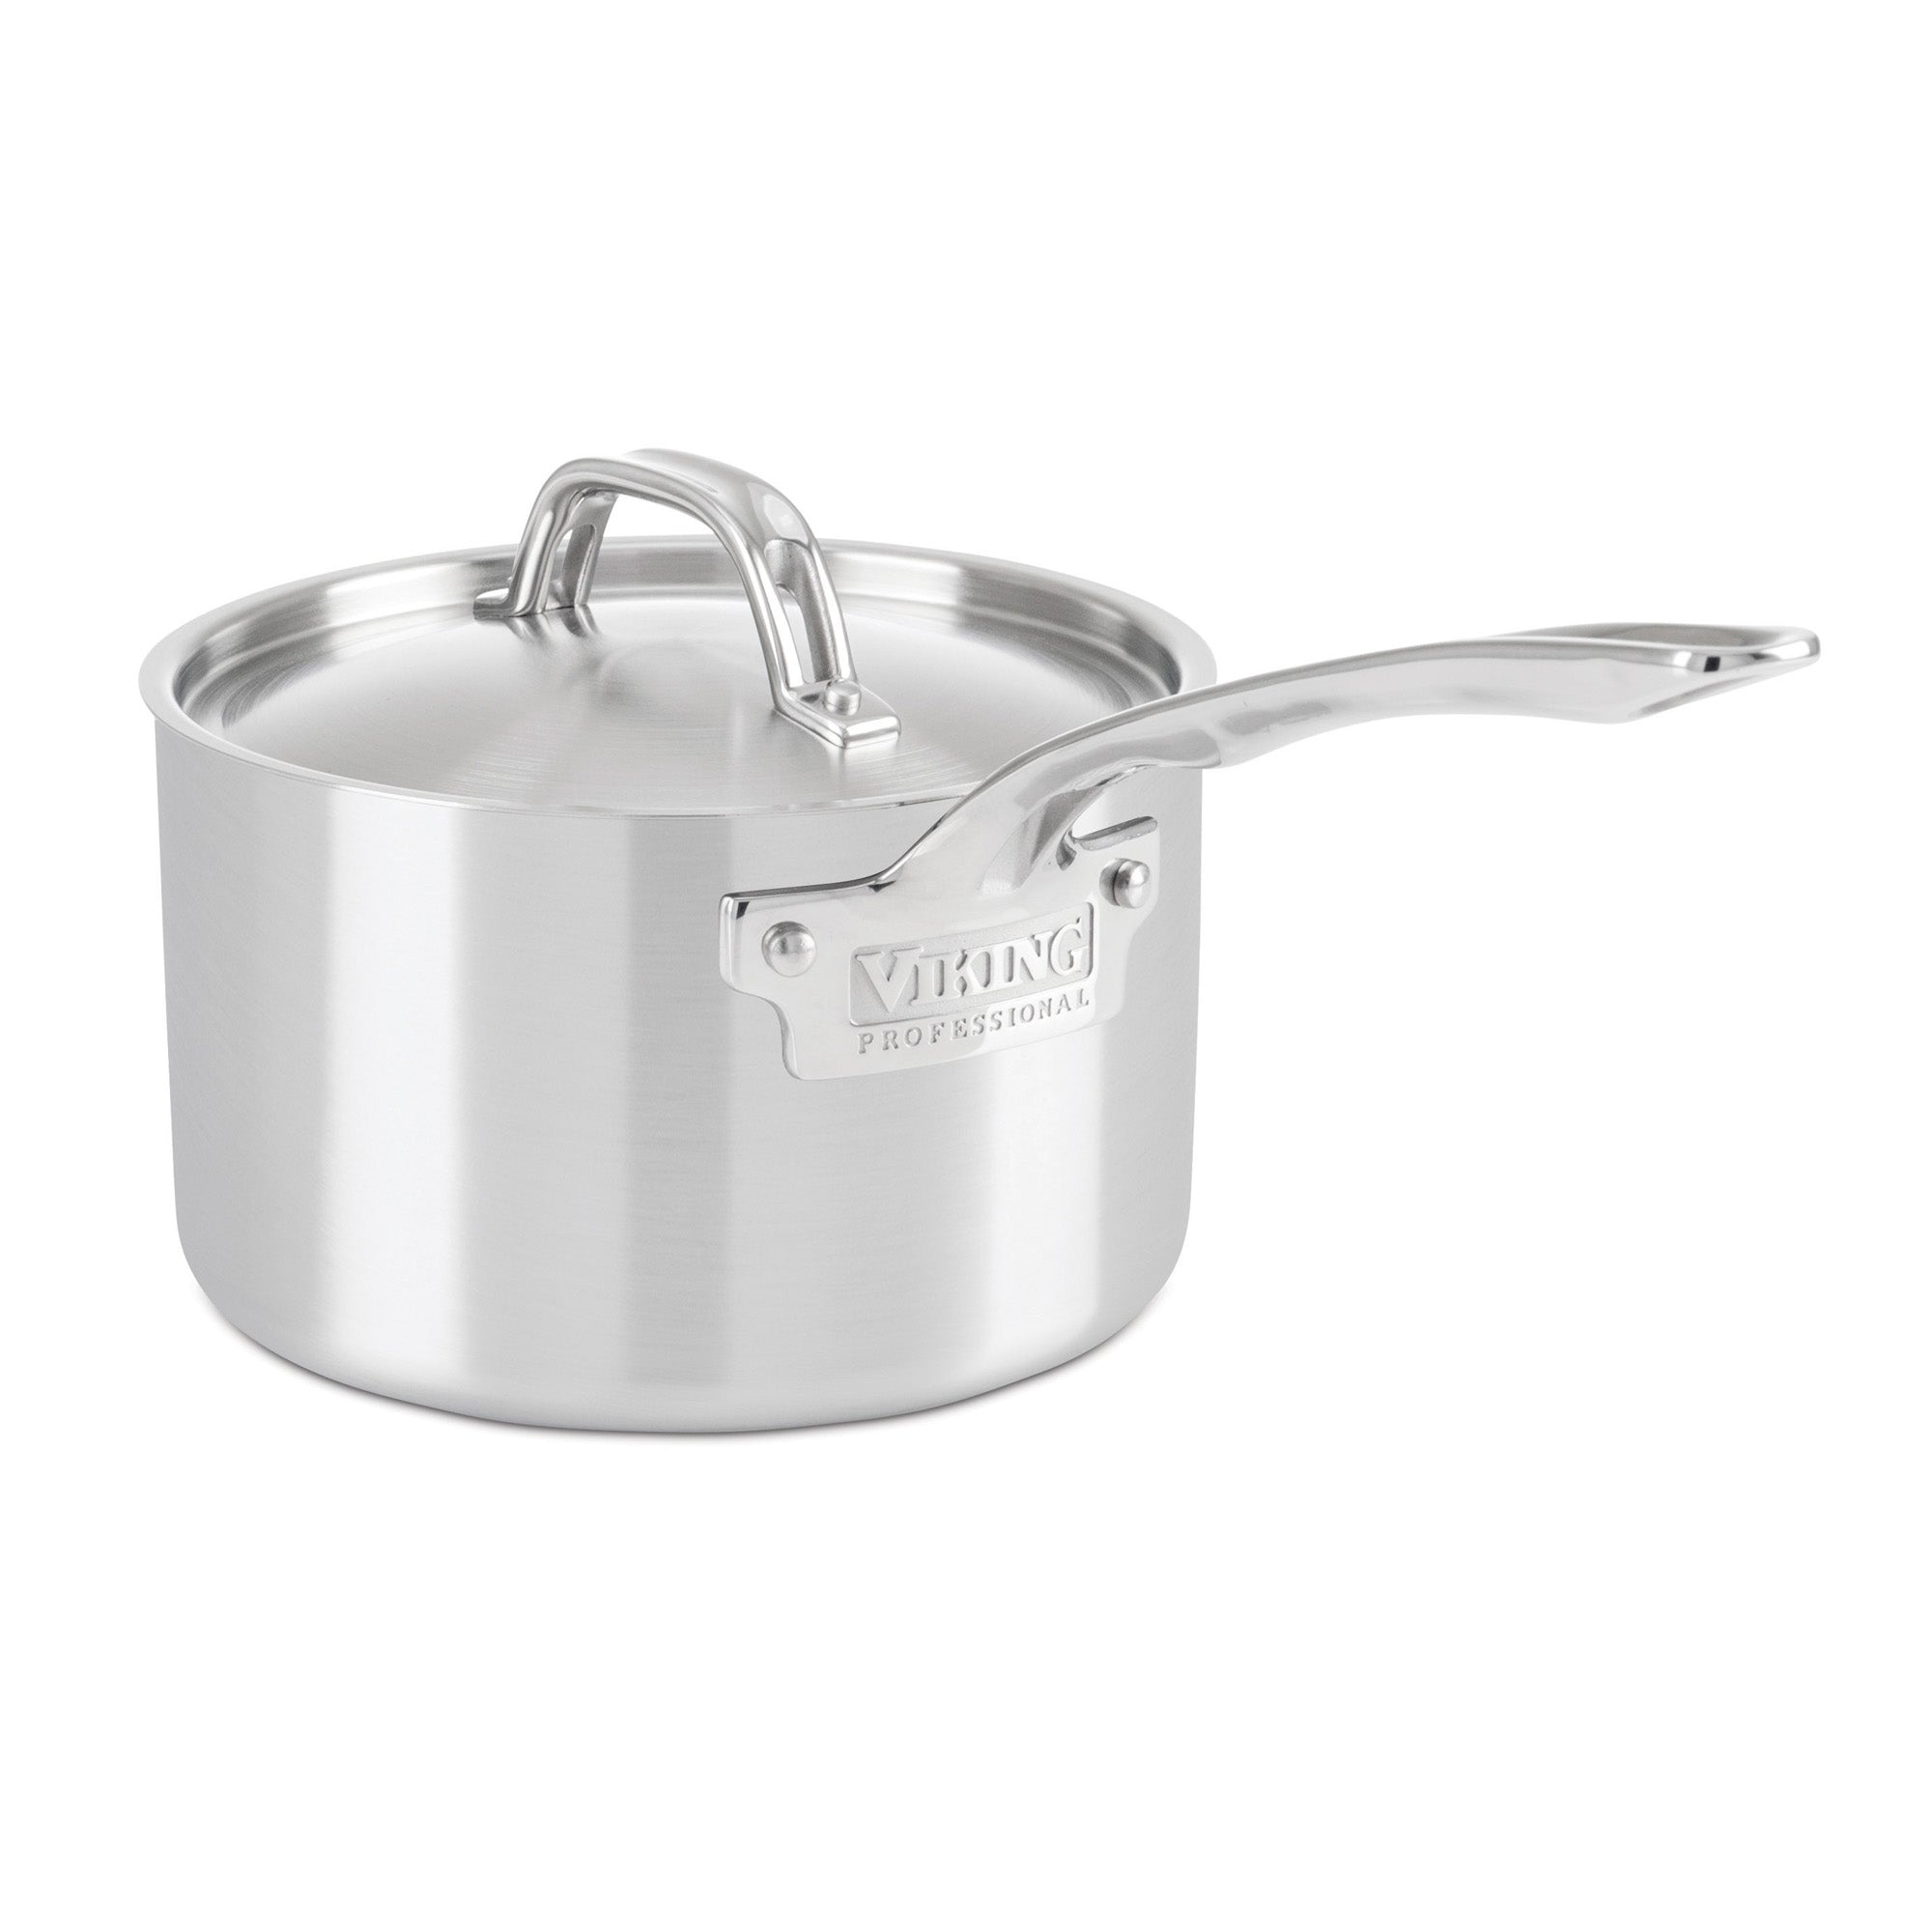 Tri-Ply Stainless Steel 3QT Saucepan Pot with Lid, Professional